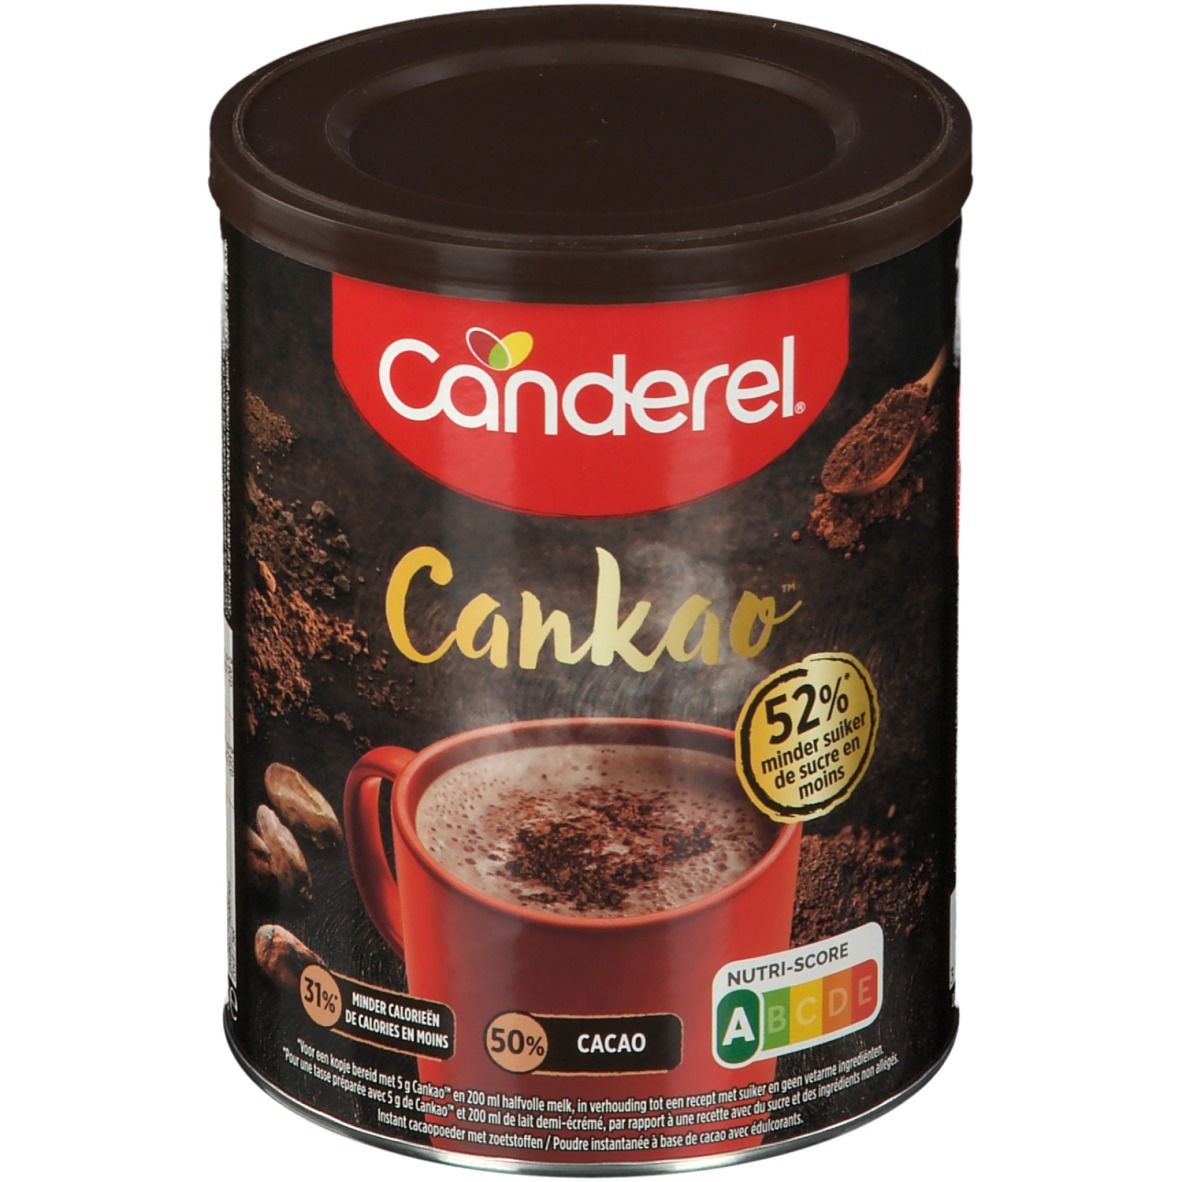 Canderel® Cankao™ 250 g